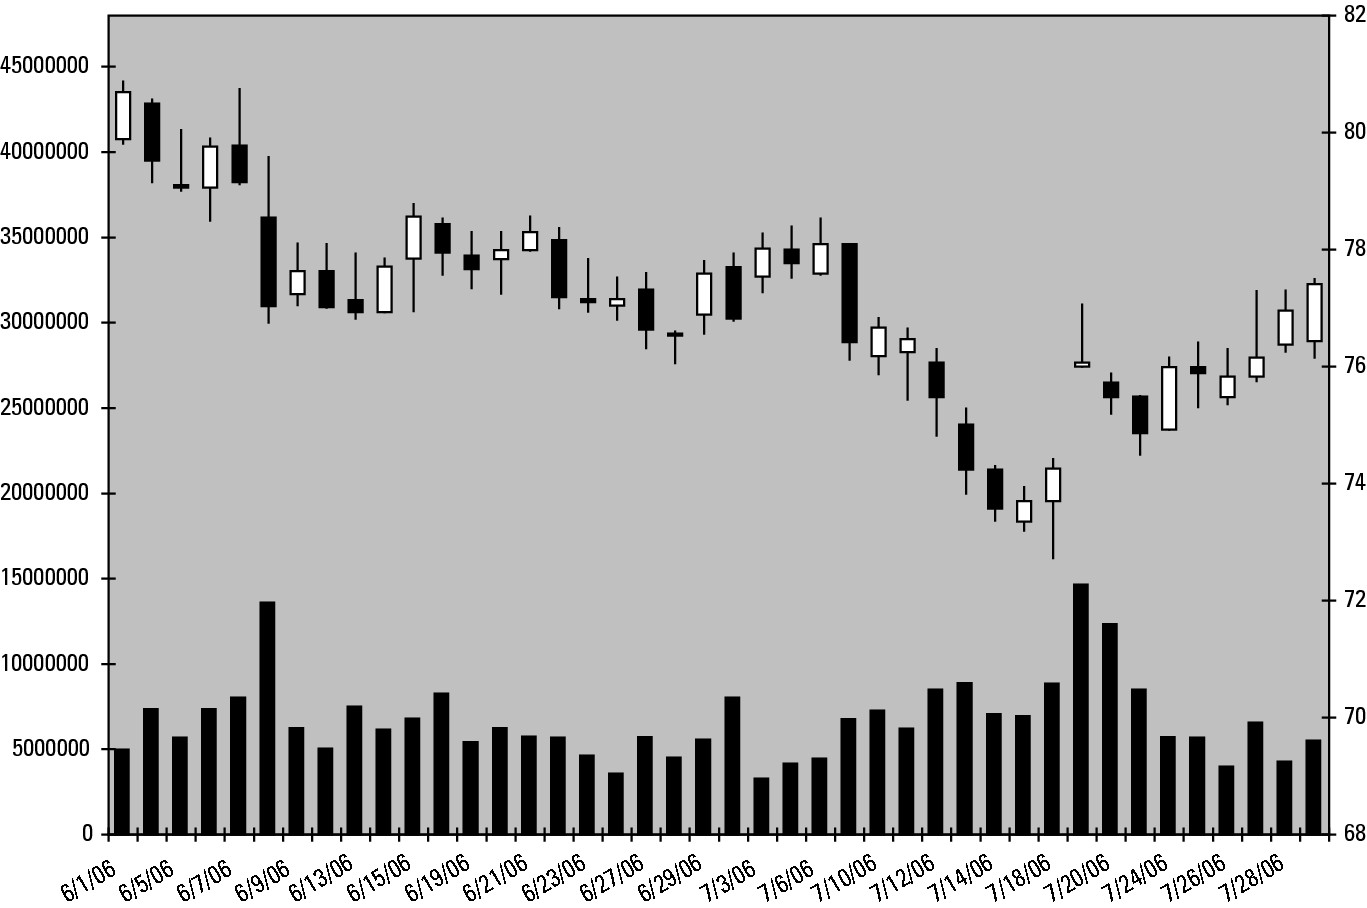 Figure 4-10: A basic Excel candlestick chart with volume.